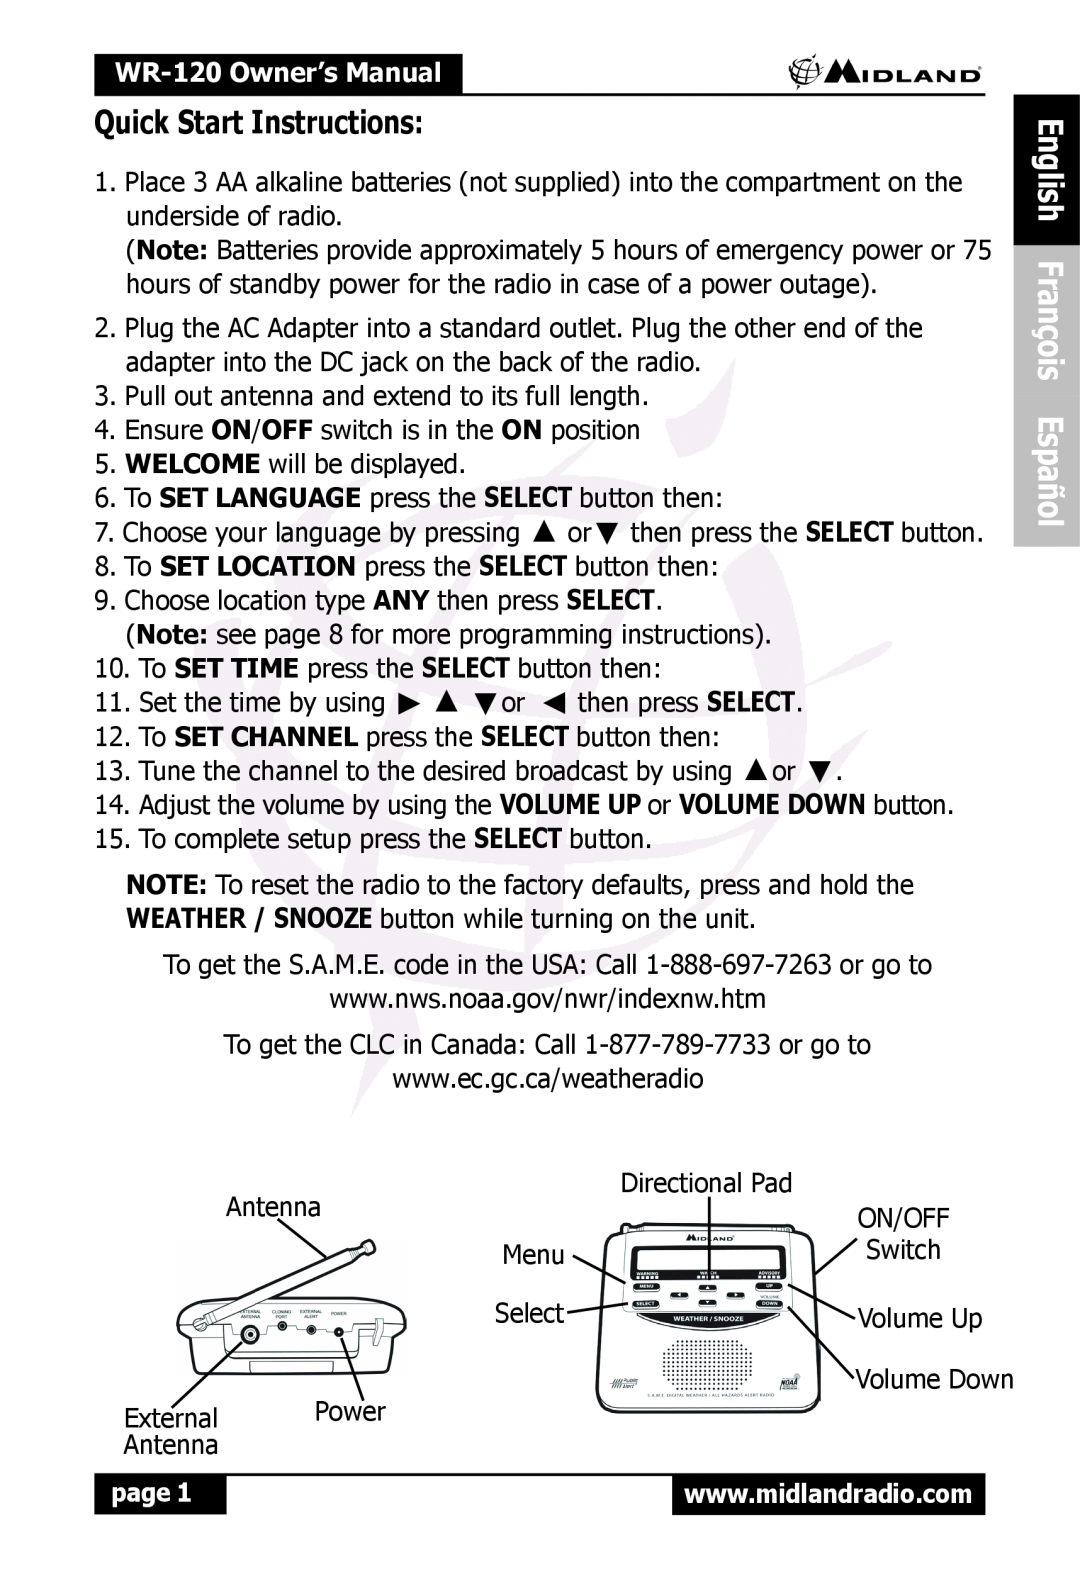 Midland Radio WR120 owner manual Quick Start Instructions, English François Español, WR-120Owner’s Manual, page 